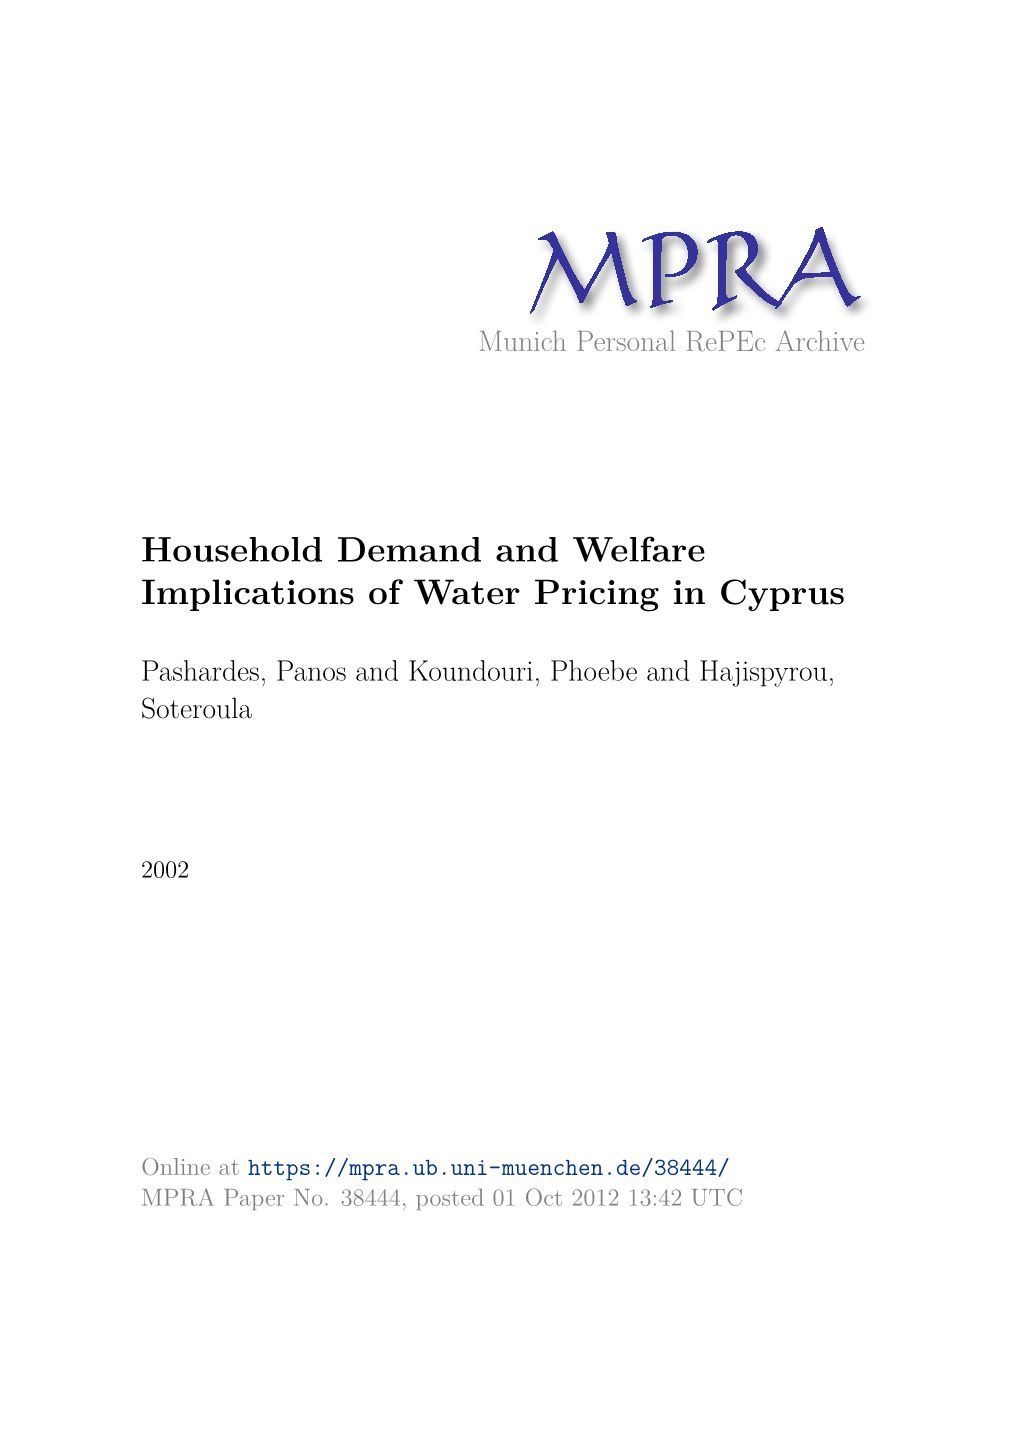 Household Demand and Welfare Implications of Water Pricing in Cyprus